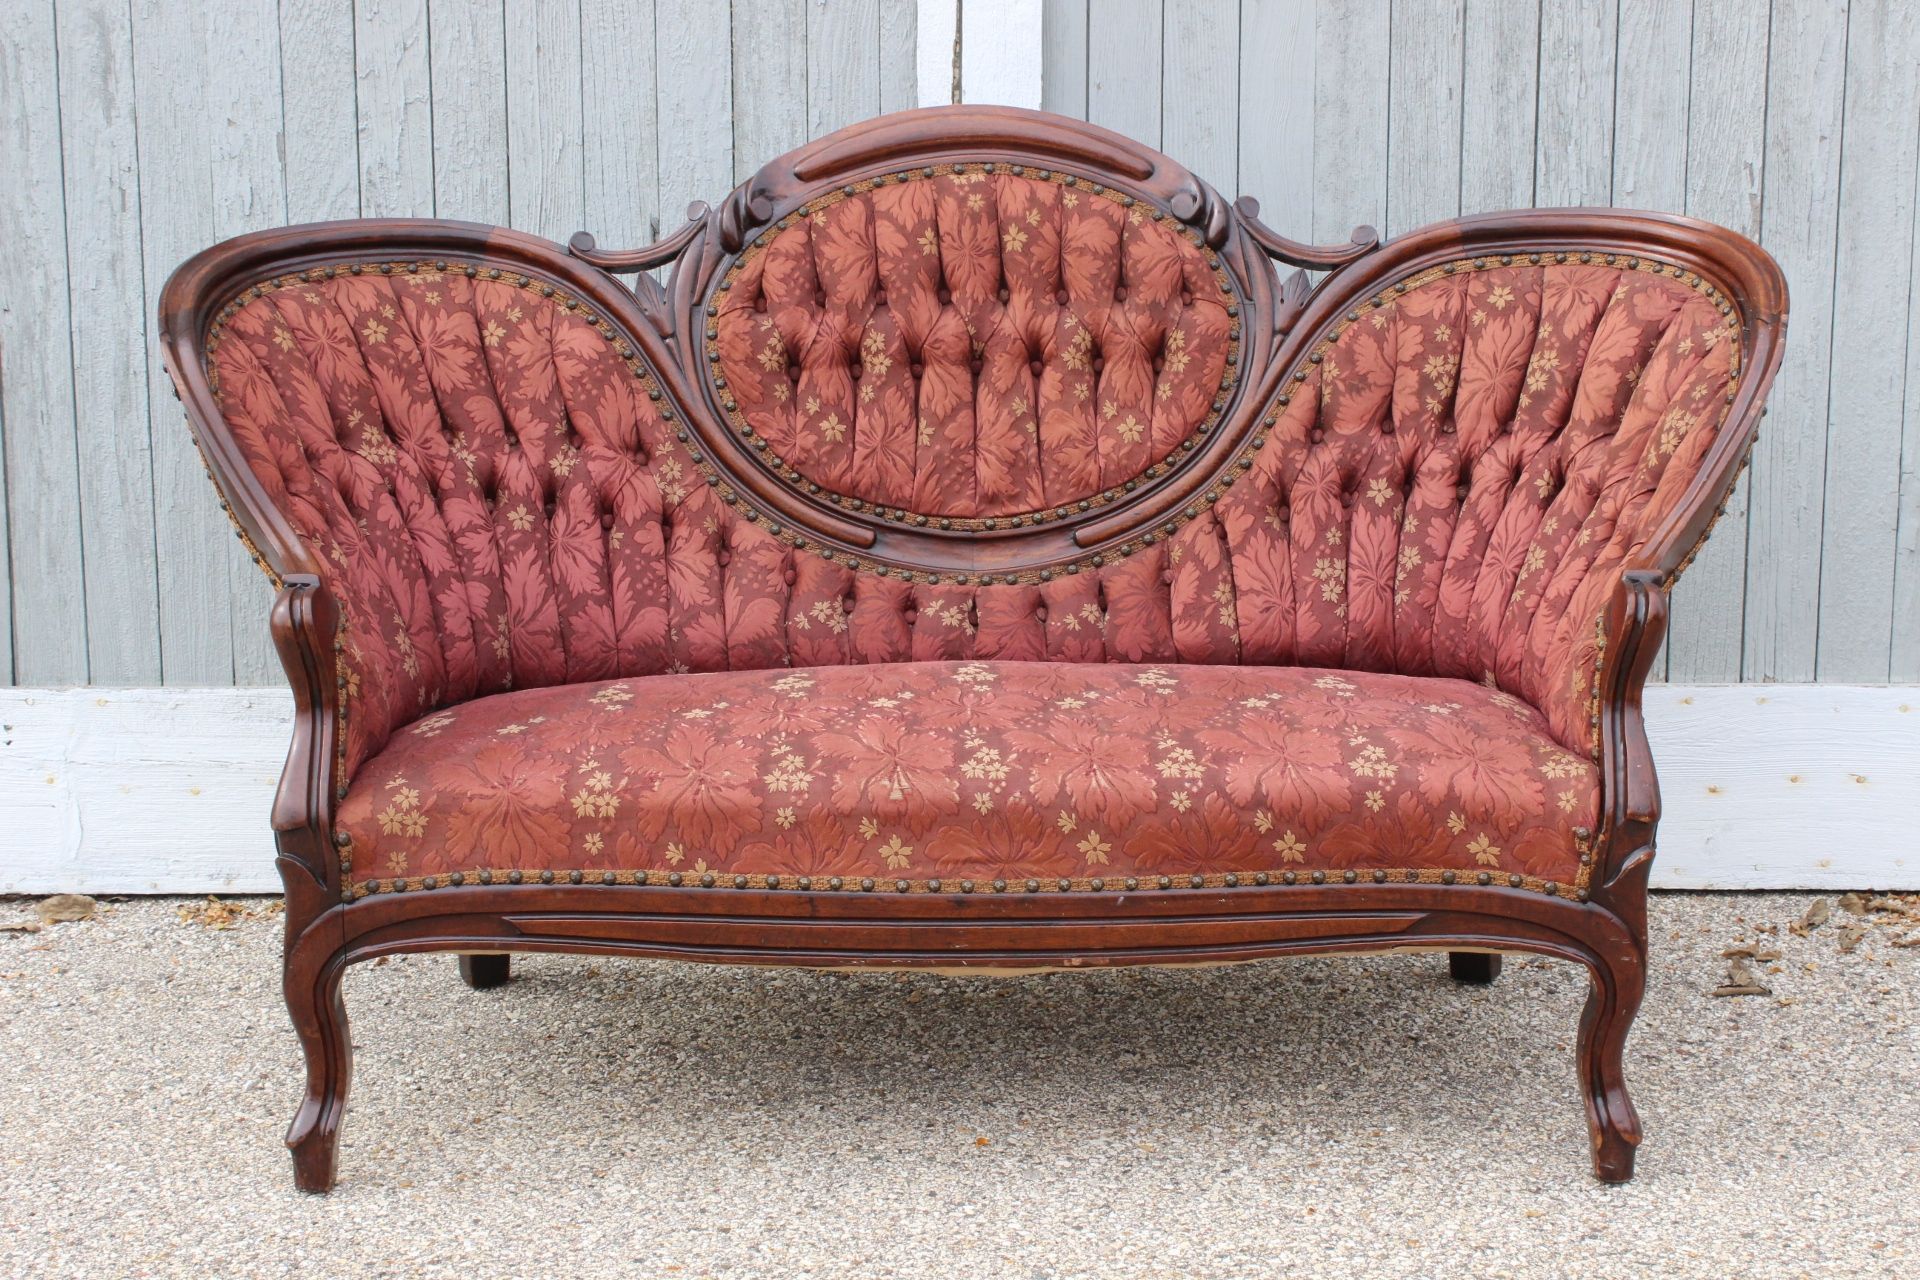 Sofas Center Antique Victorian Sofa Styles Style Styleantique Intended For Vintage Sofa Styles (View 12 of 15)